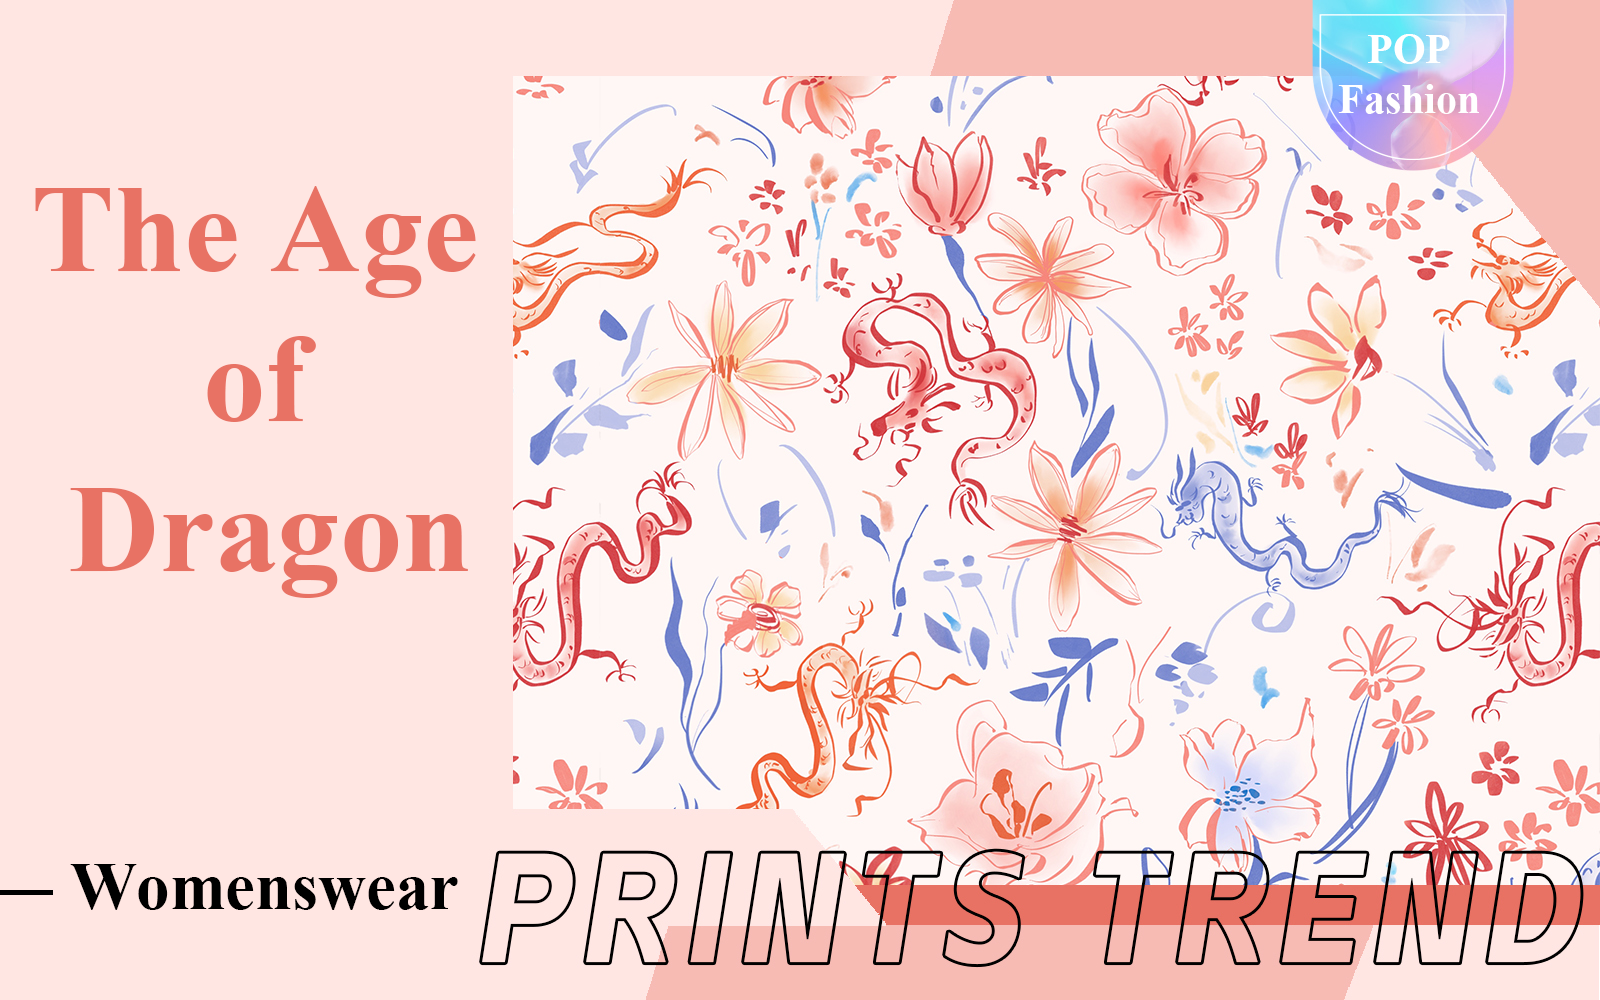 The Age of Dragon -- The Pattern Trend for Womenswear